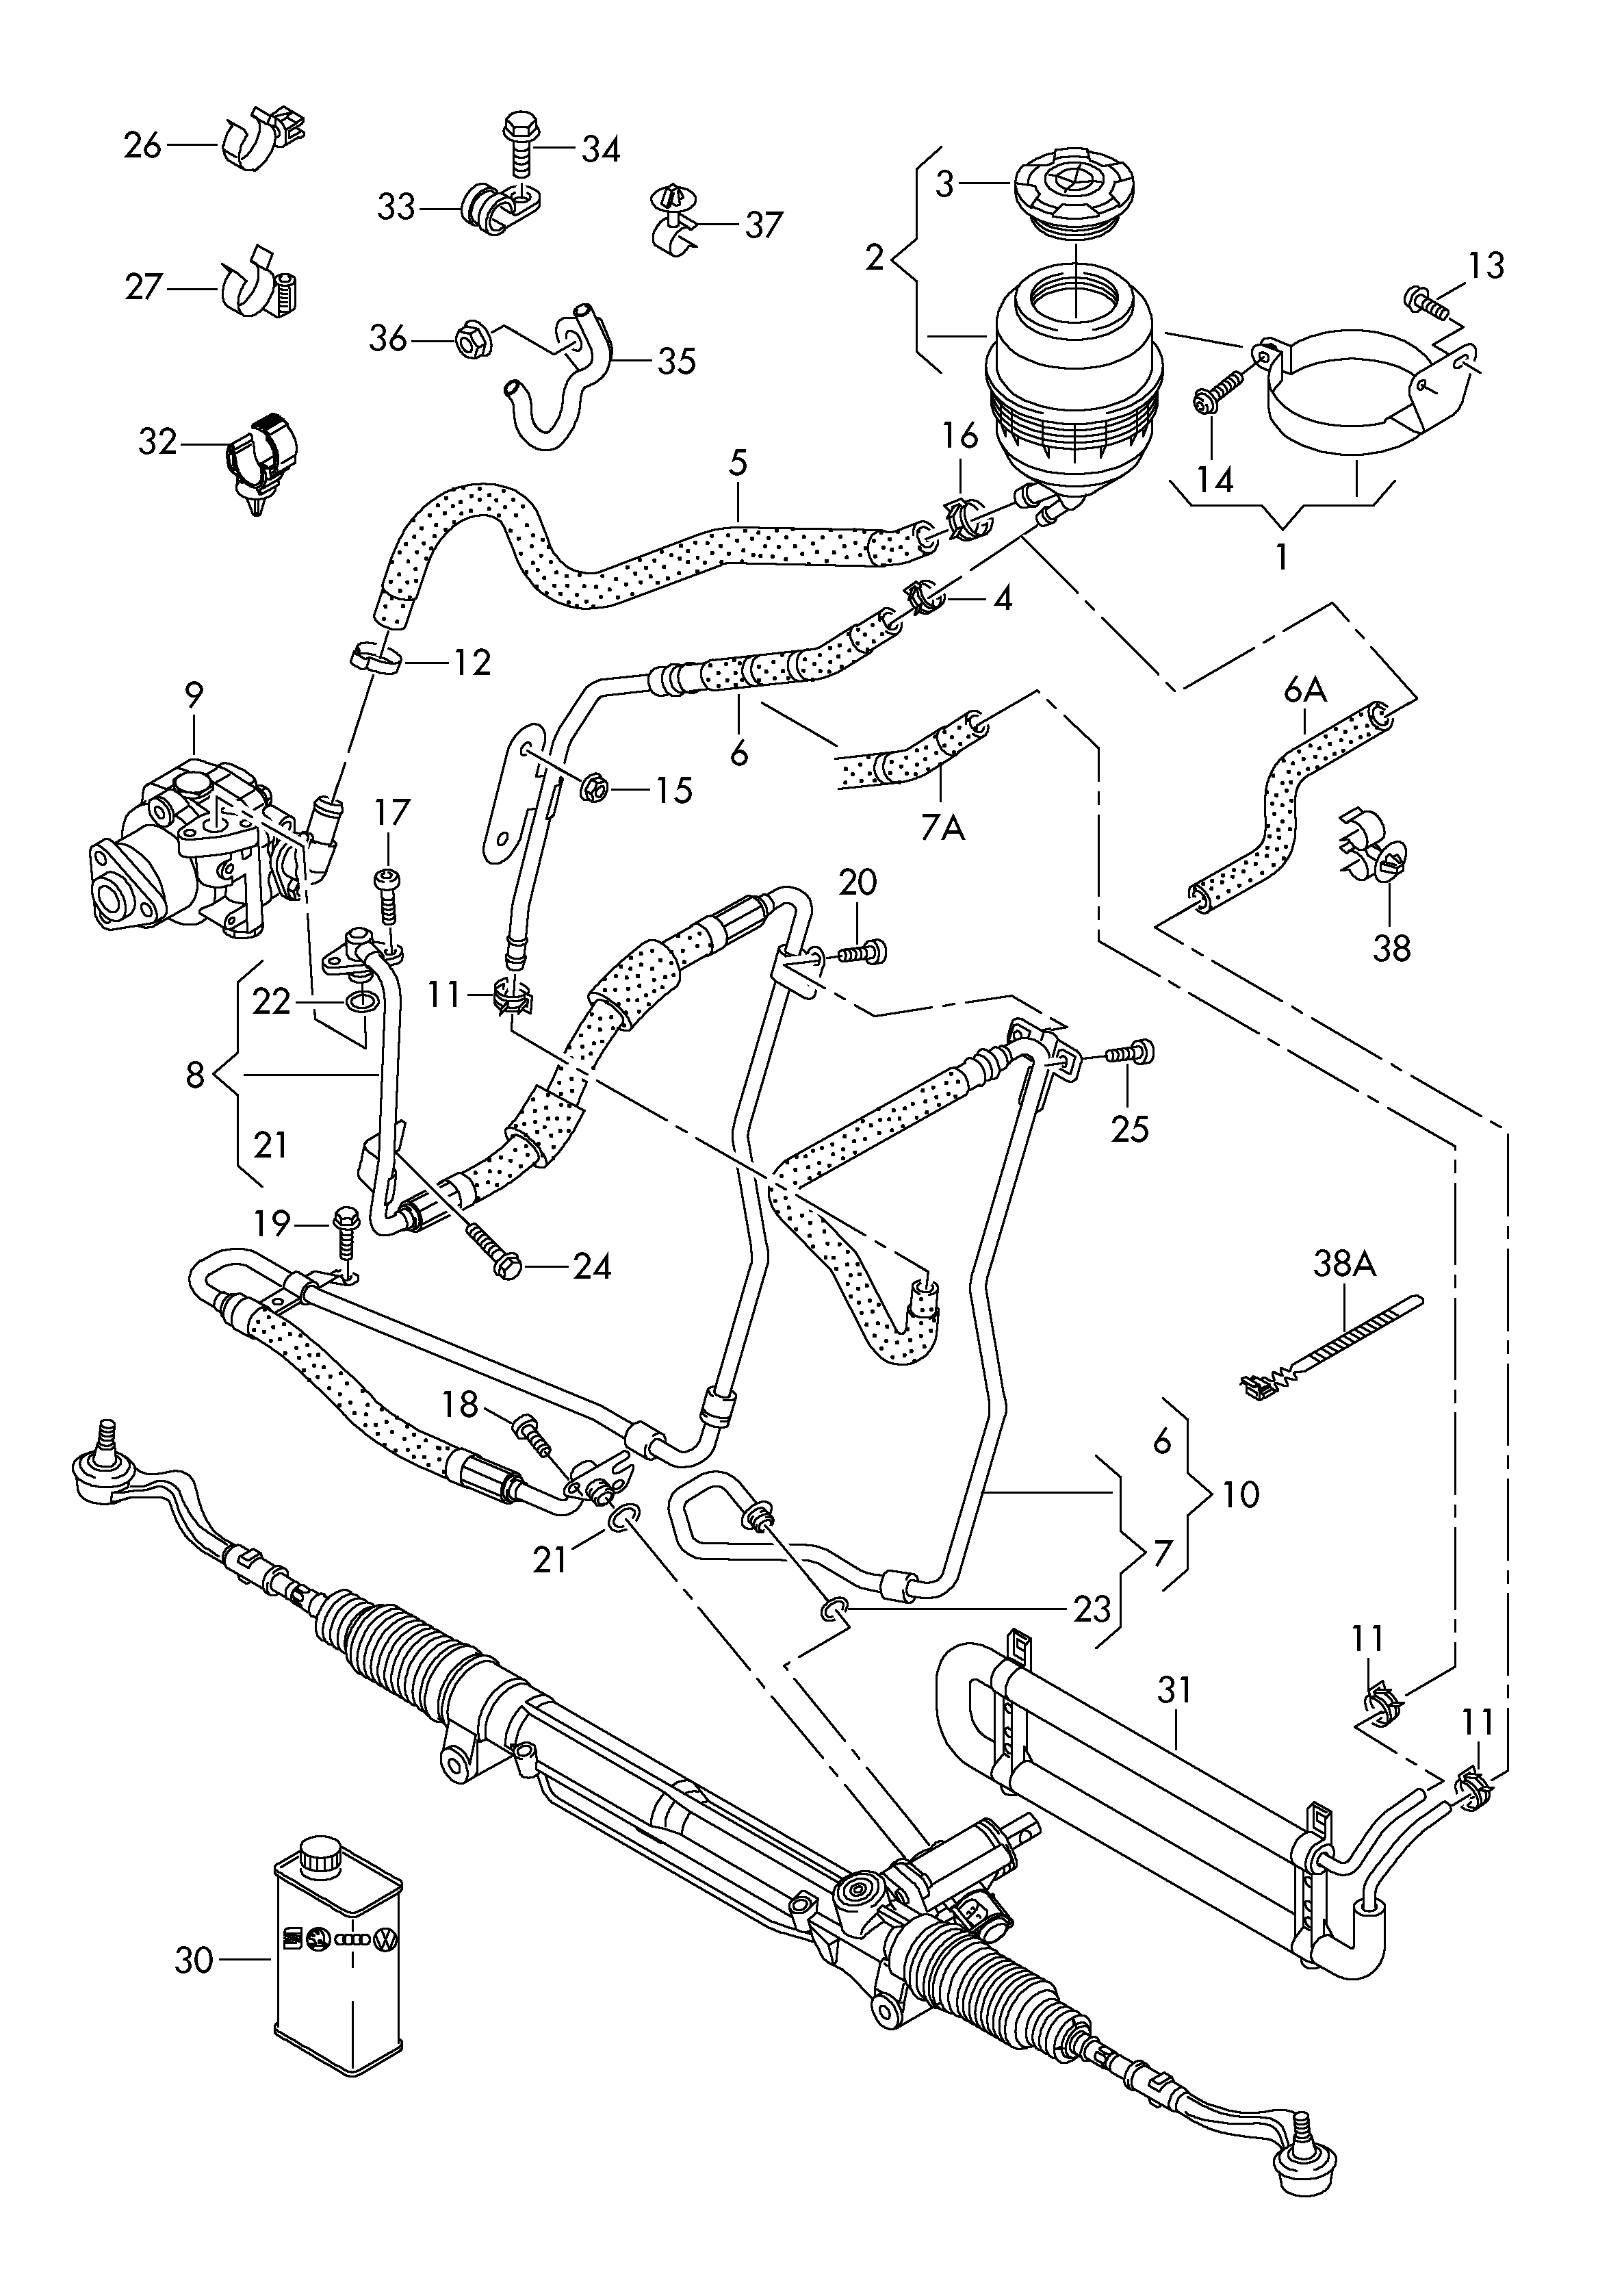 oil container and connection
parts, hoses - Audi A4/Avant(A4)  